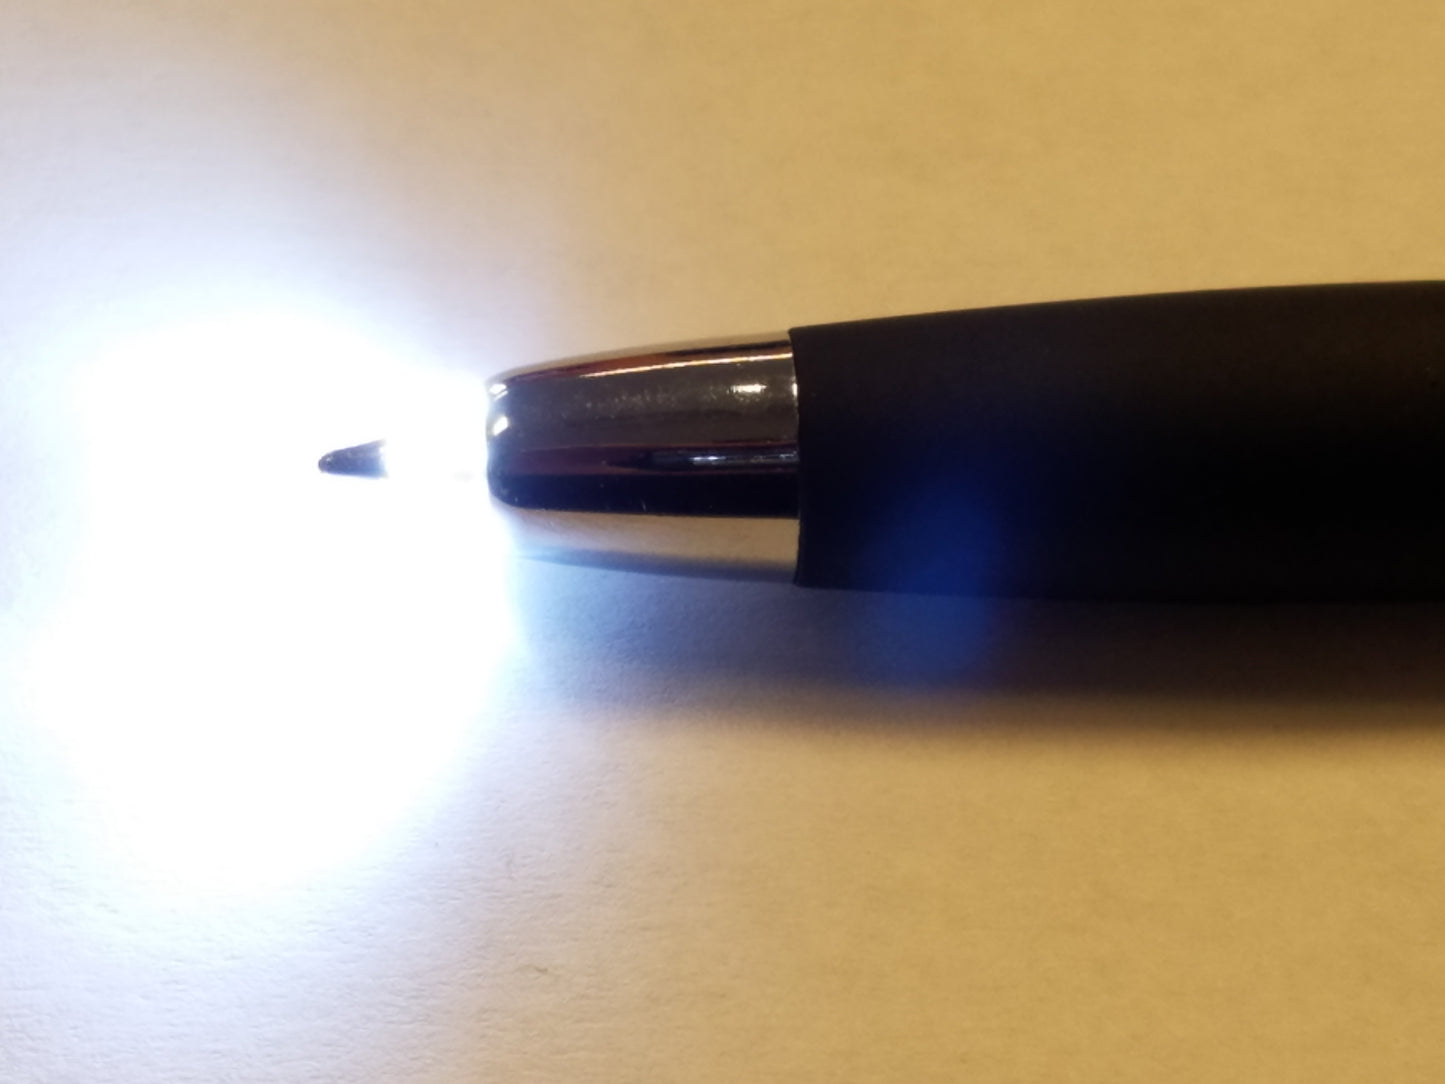 A close up of the pen tip with the light on